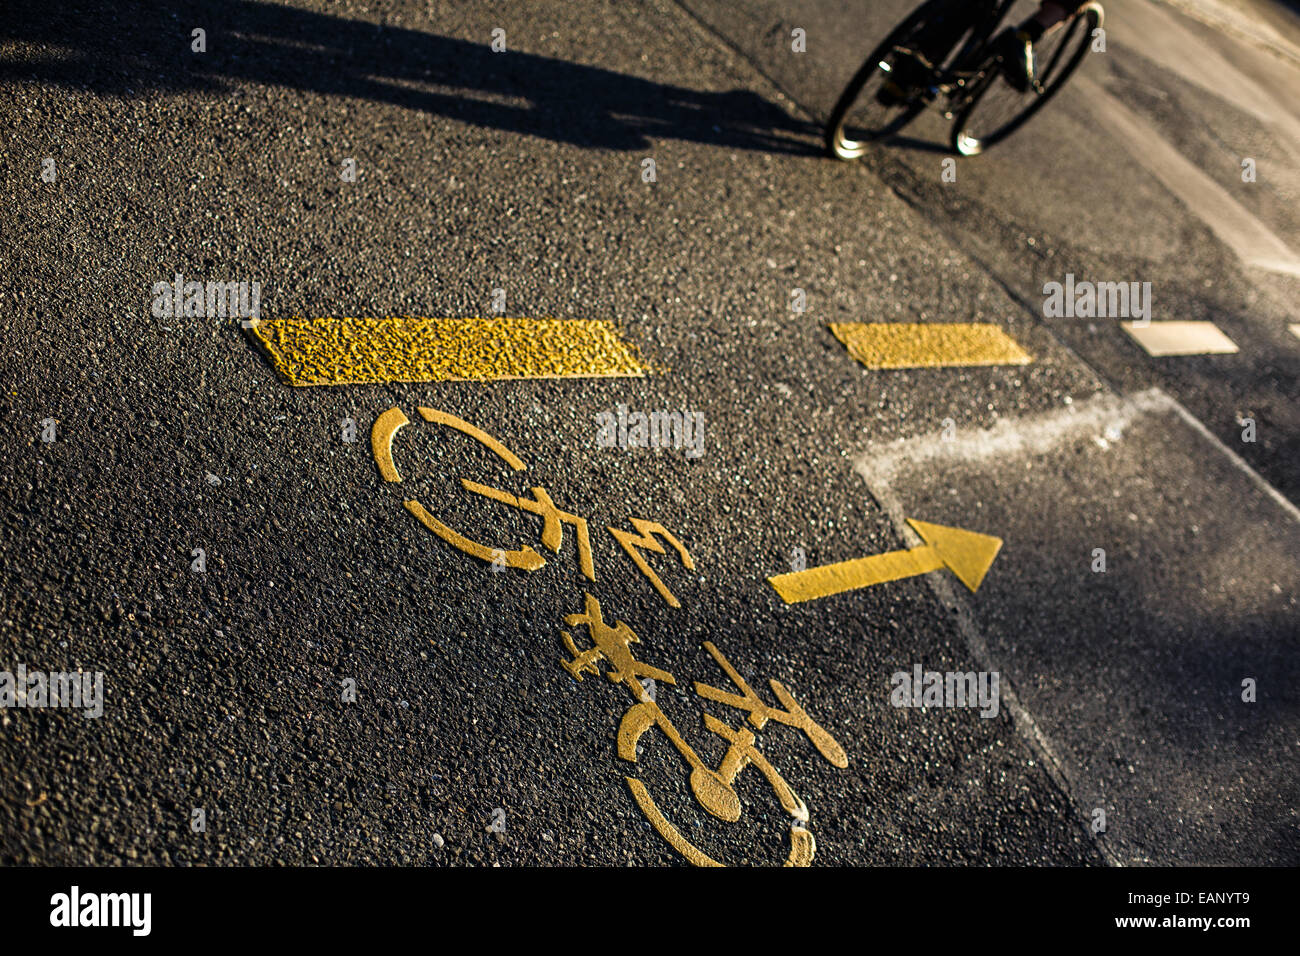 Biker/Cyclist on a crossing in a city casting a long shadow Stock Photo